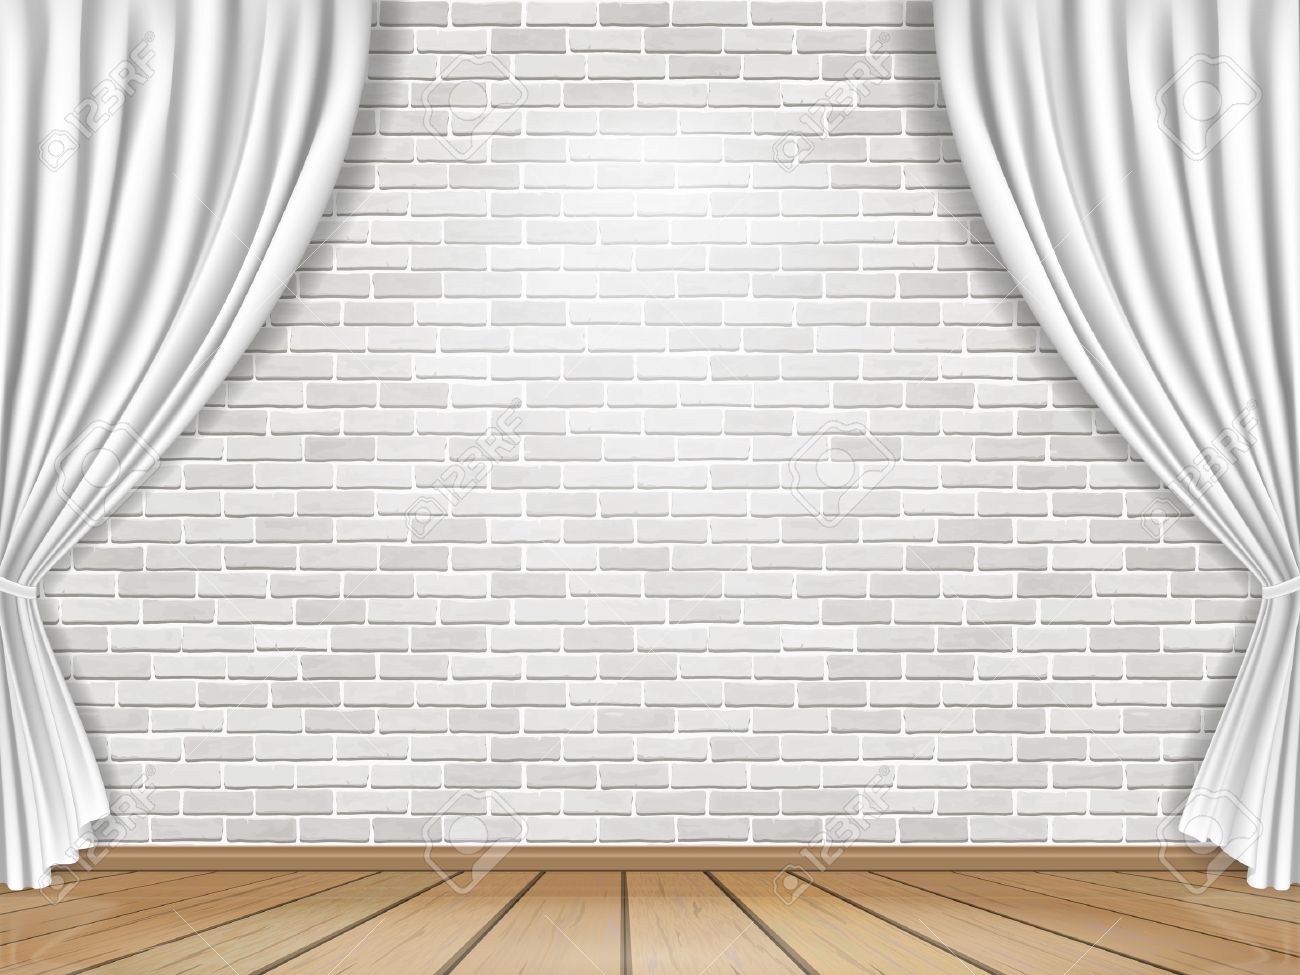 Stage With White Curtains On Brick Wall Background Royalty